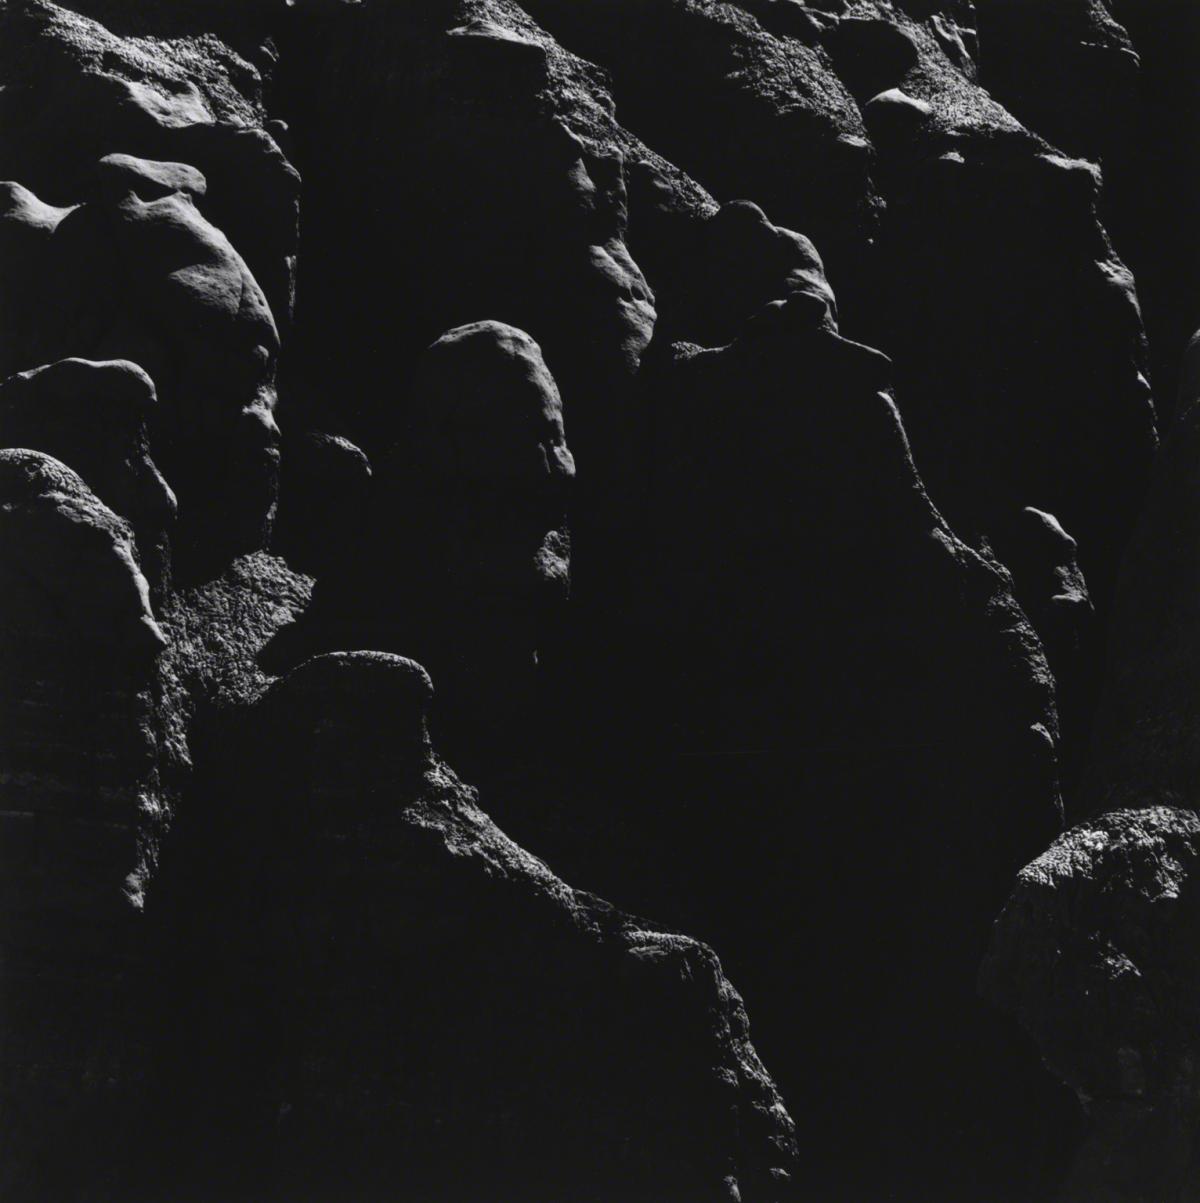 A dark black and white photograph showing a rocky outcropping